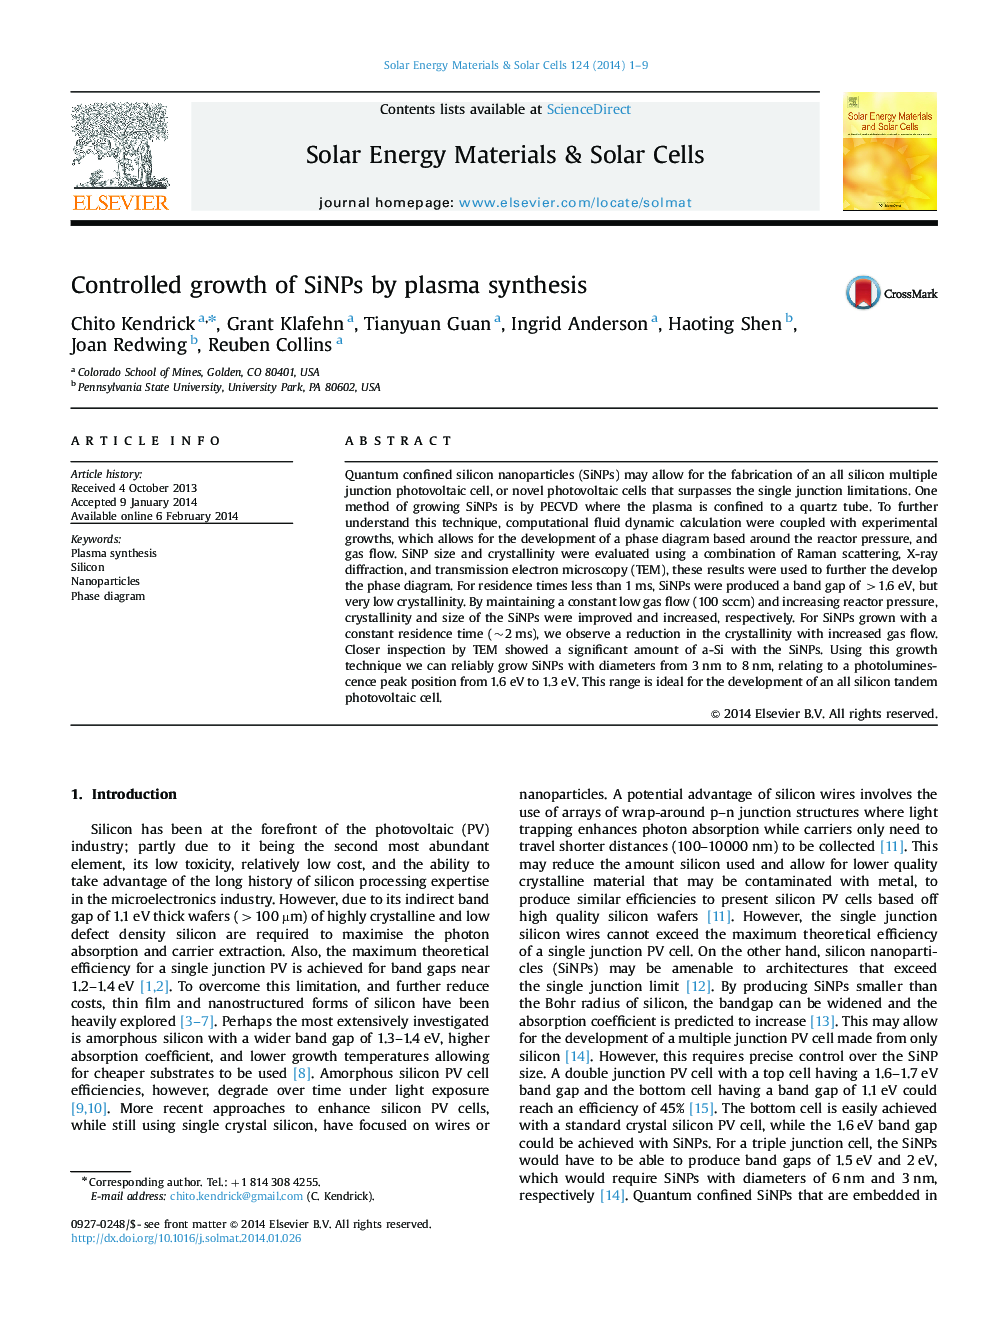 Controlled growth of SiNPs by plasma synthesis